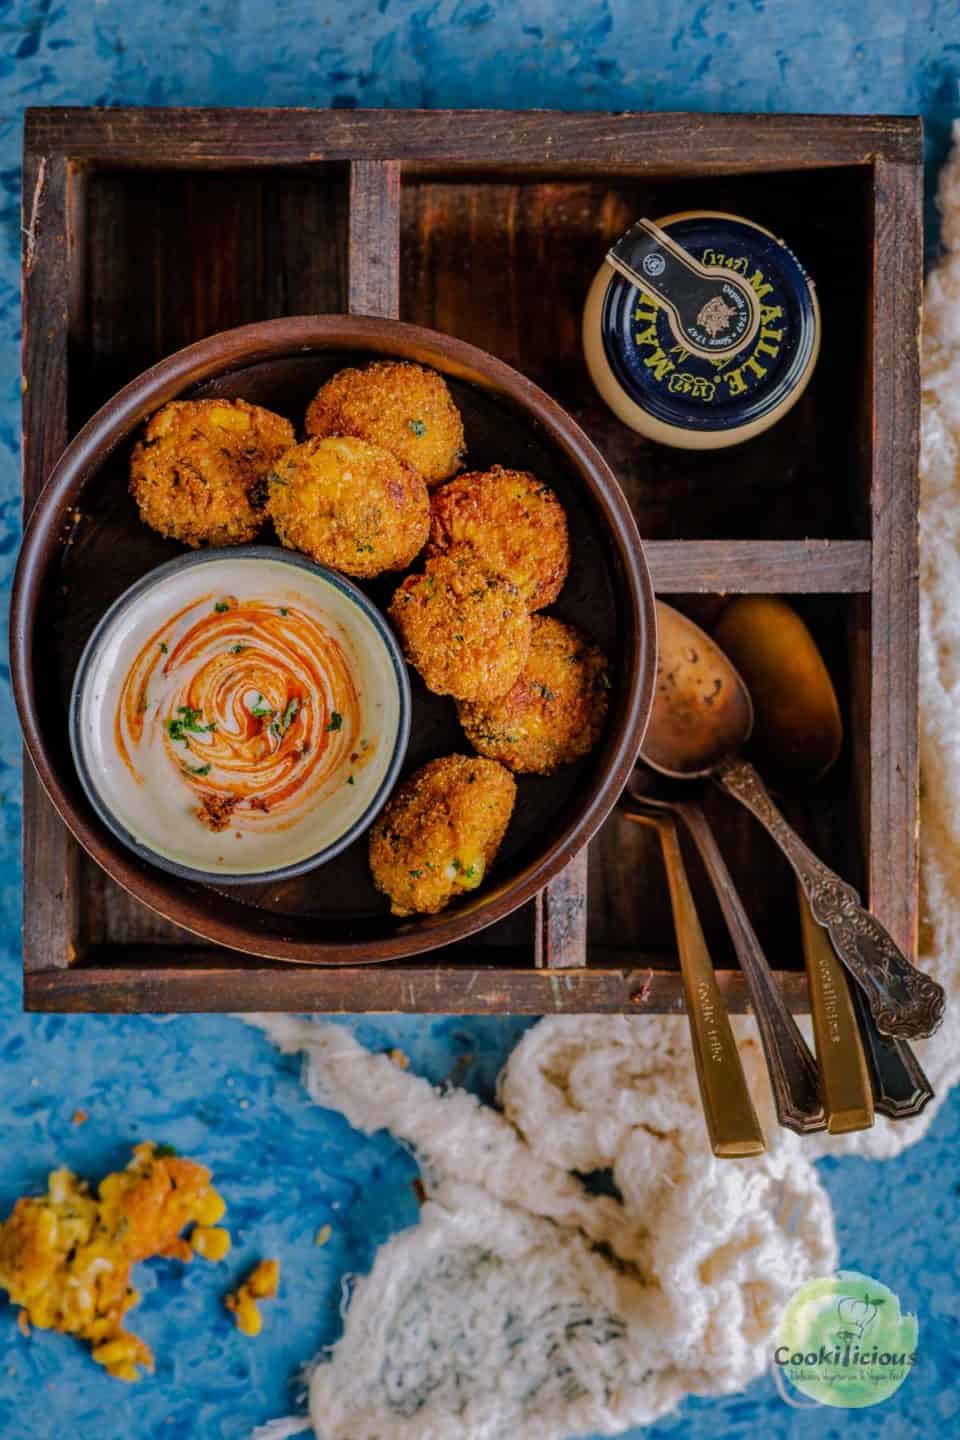 Cheese Corn Balls/Croquettes served in a round platter with spoons on the side